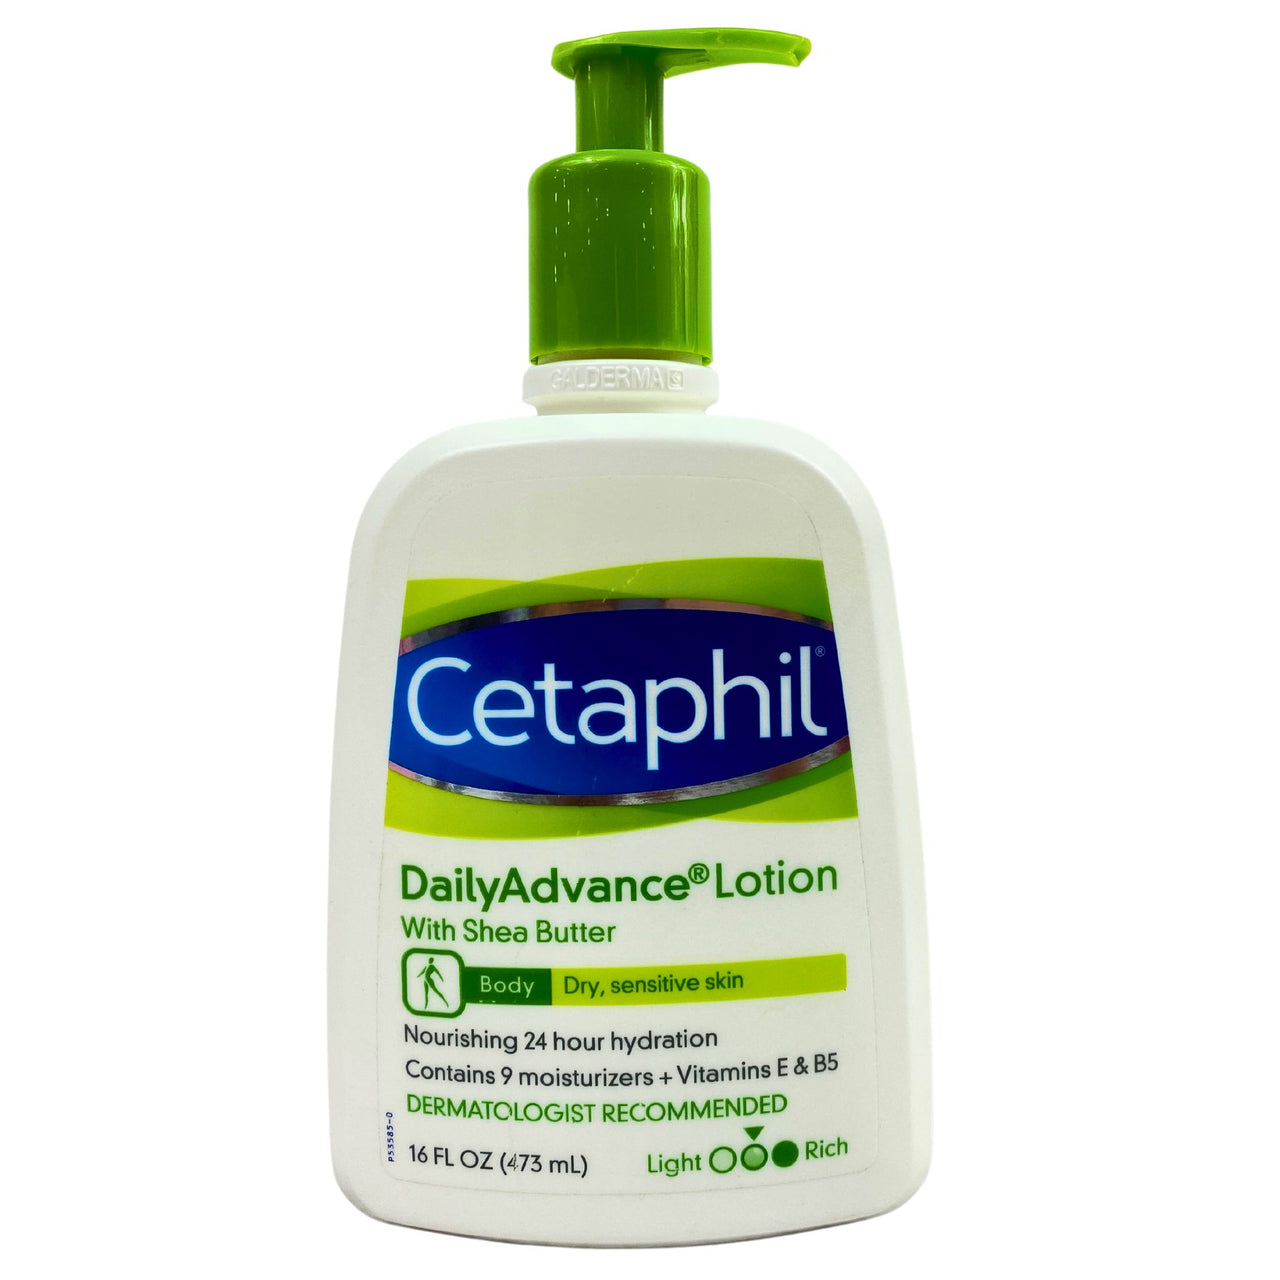 Cetaphil DailyAdvance Lotion with Shea Butter